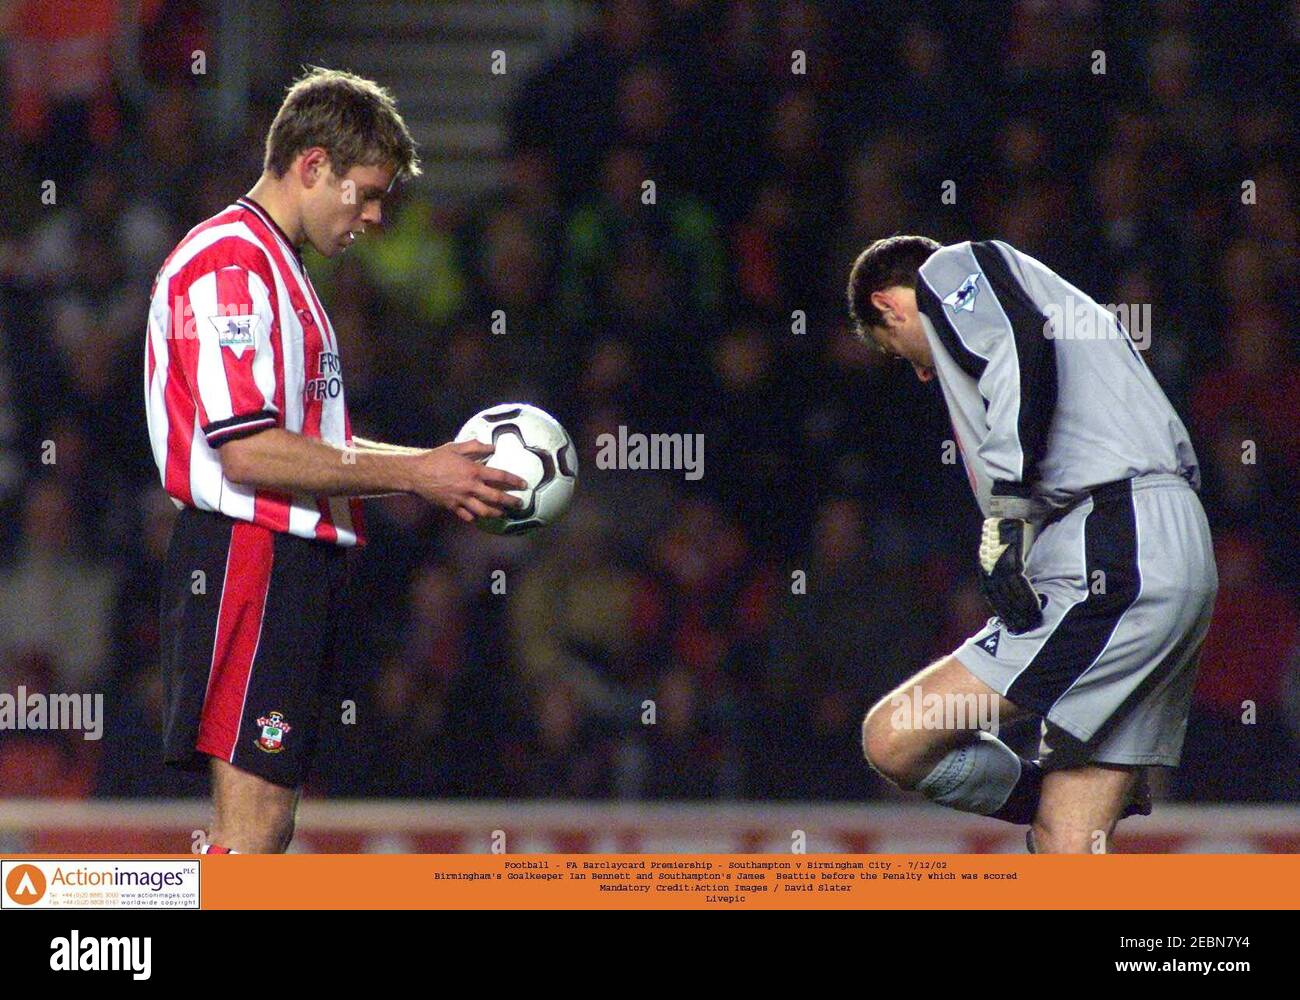 Football - FA Barclaycard Premiership - Southampton v Birmingham City - 7/12/02  Birmingham's Goalkeeper Ian Bennett and Southampton's James  Beattie before the Penalty which was scored   Mandatory Credit:Action Images / David Slater  Livepic Stock Photo